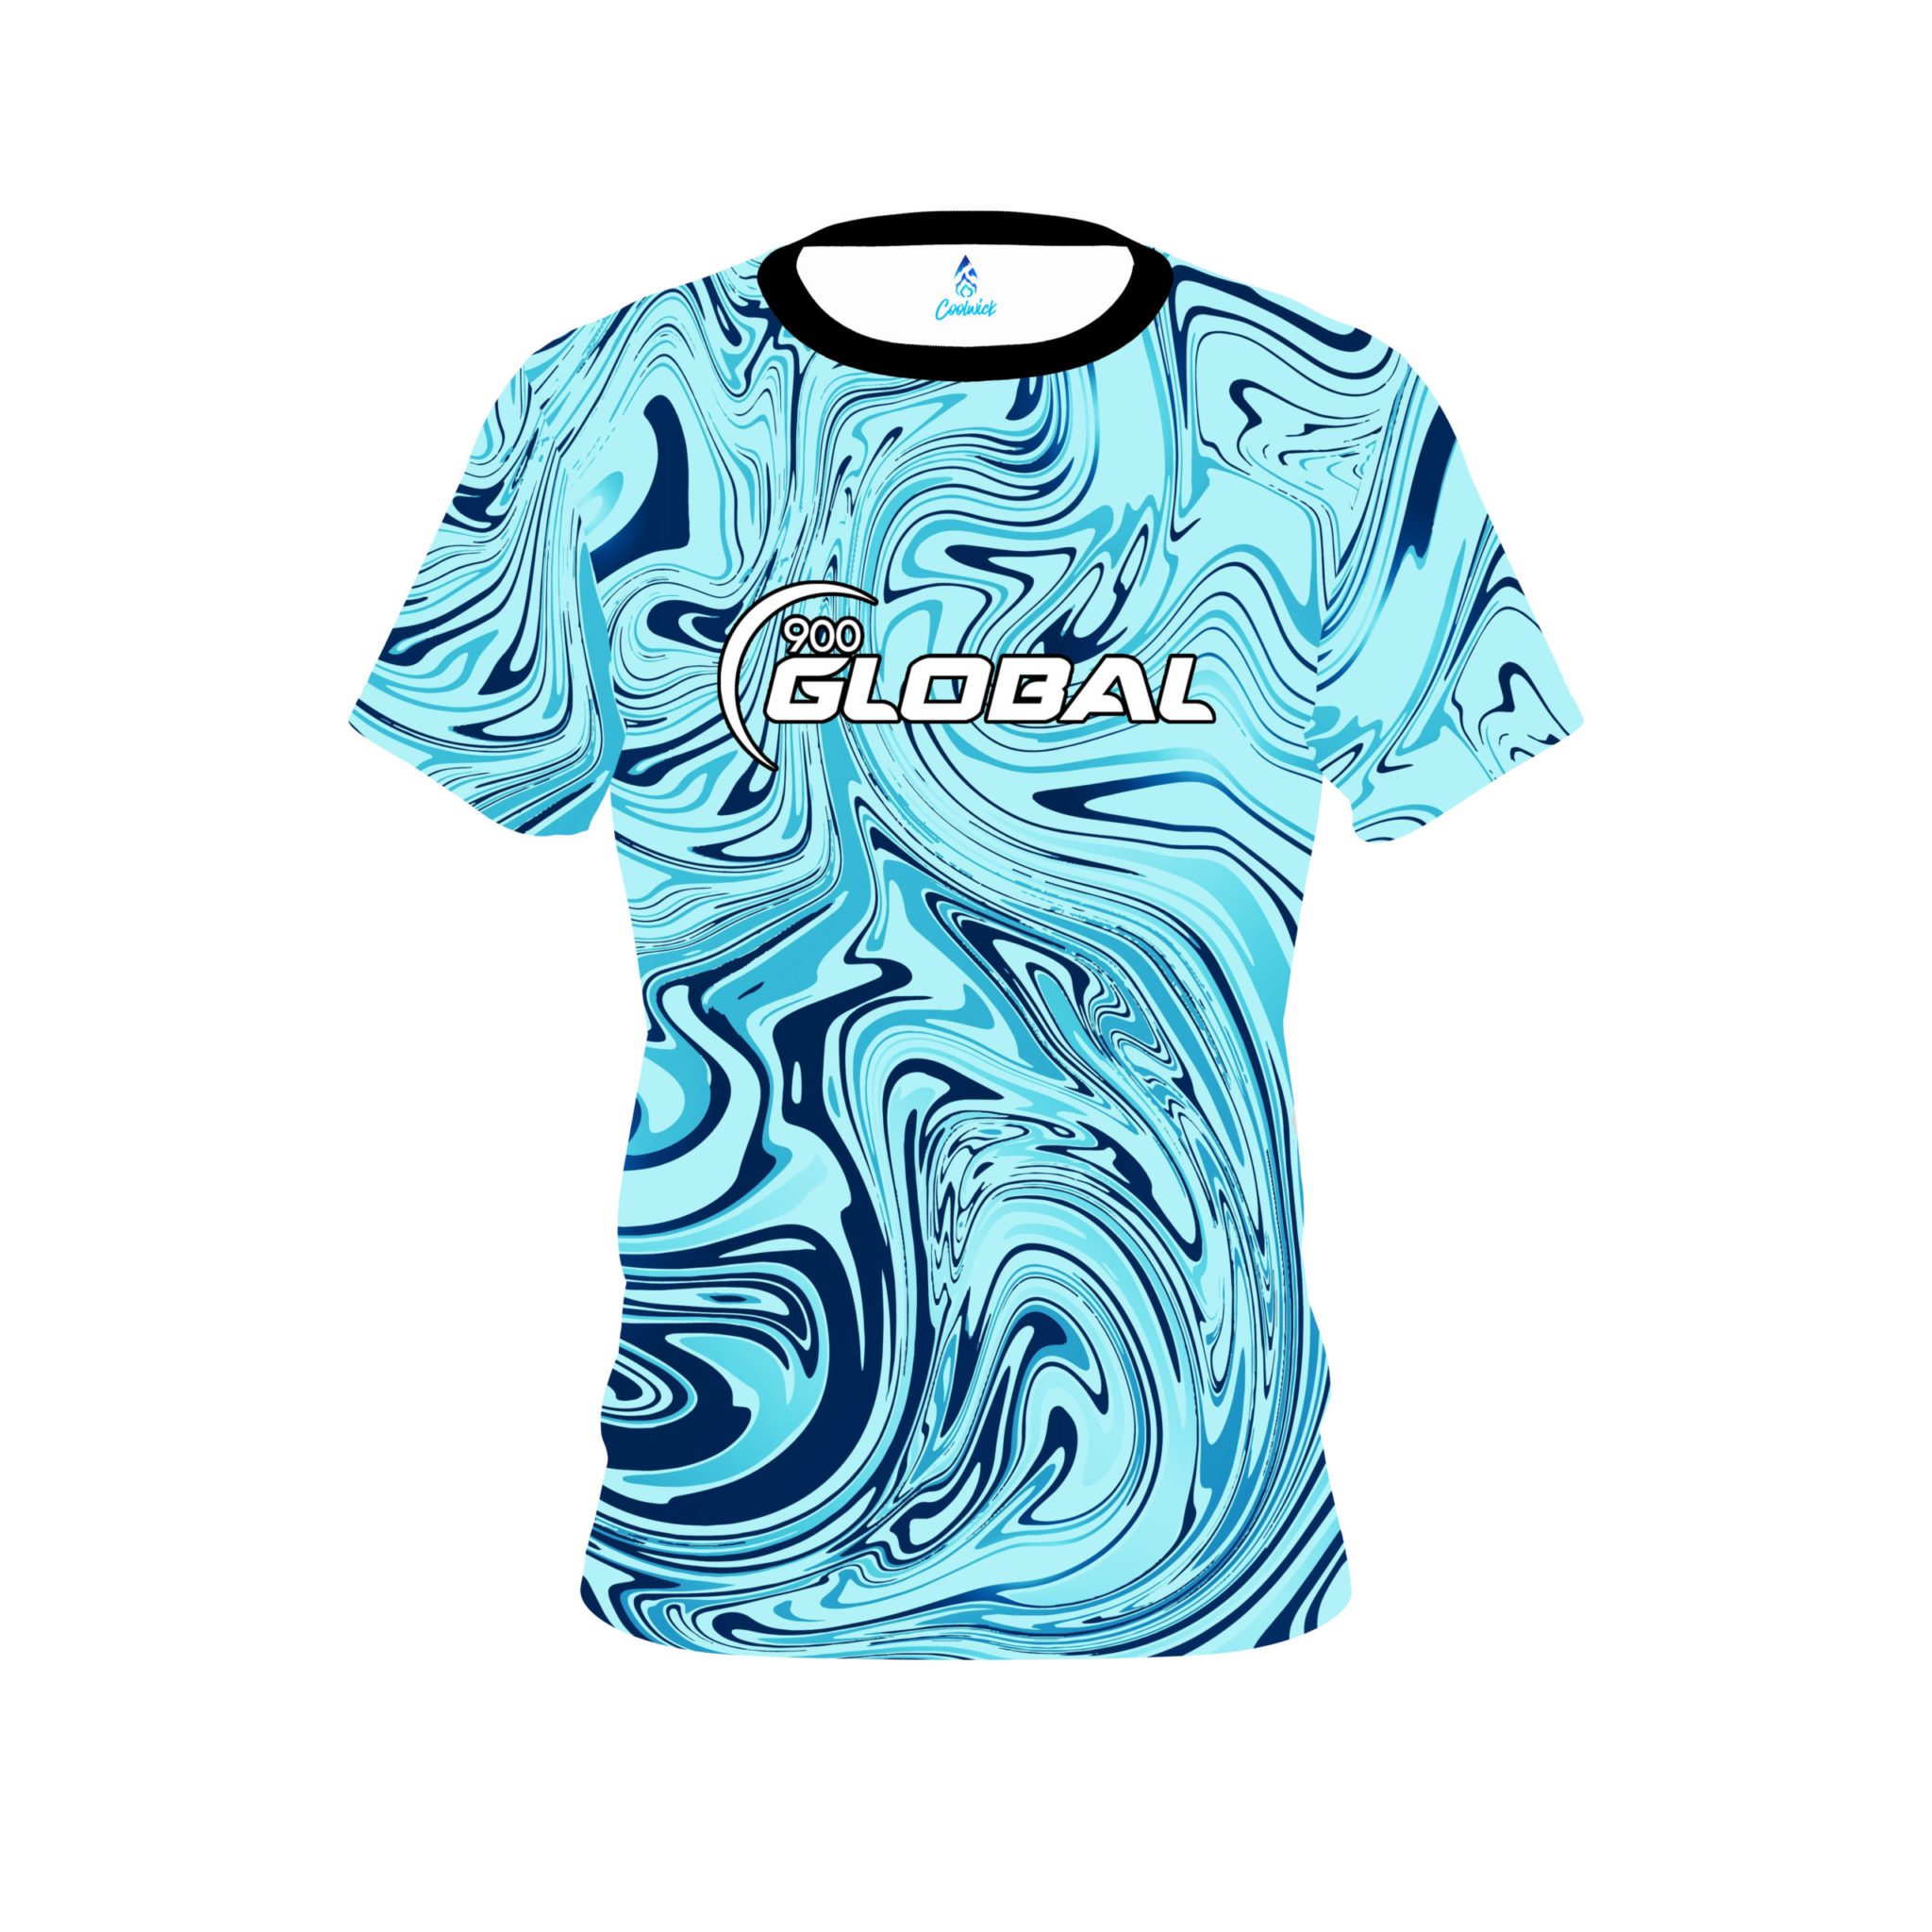 900 Global Blue Hallucinate CoolWick Bowling Jersey